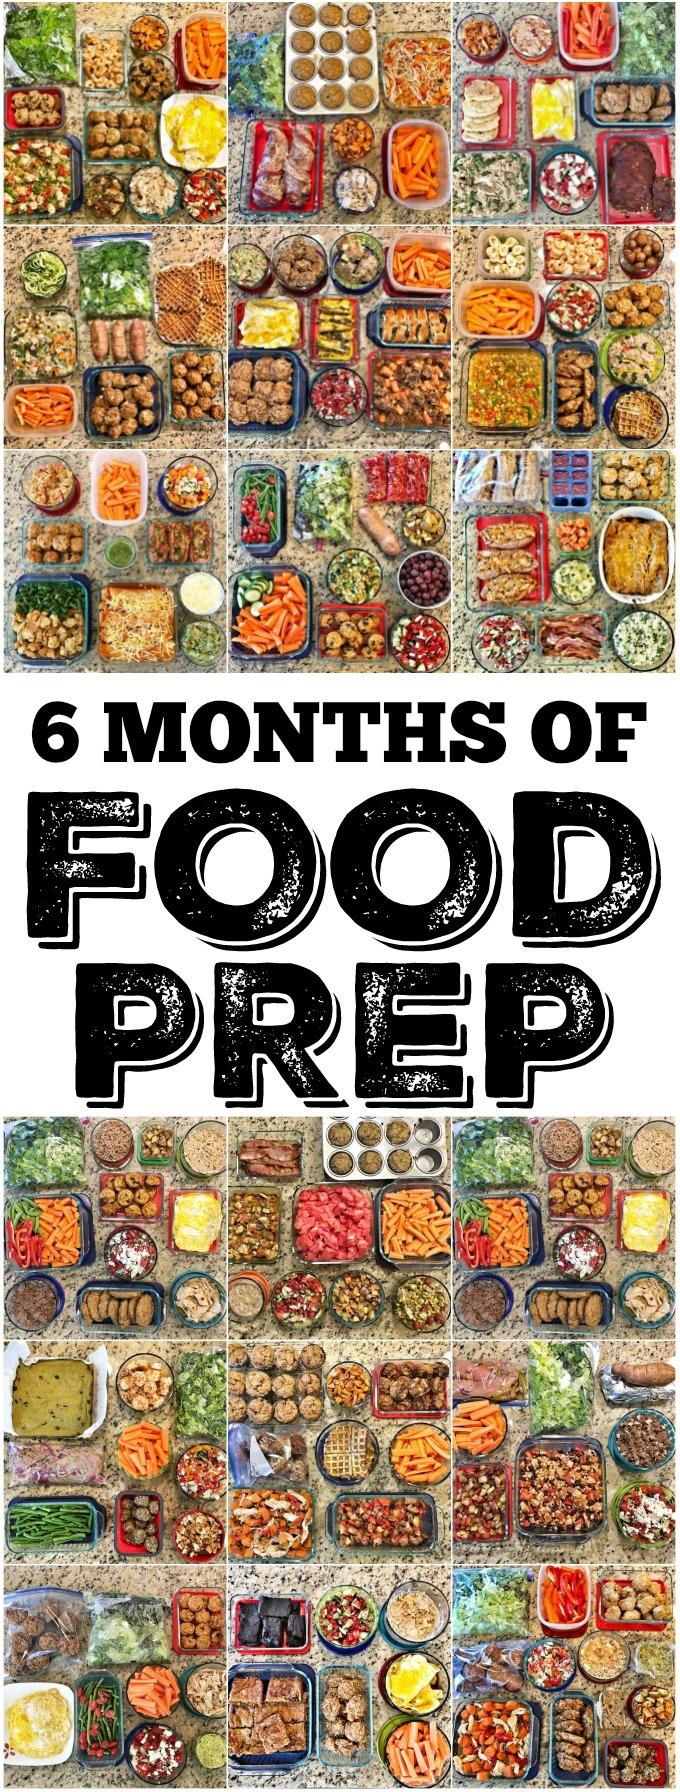 I challenged myself to 6 months of food prep. That means every weekend for six months straight, I spent at least some time prepping food for the week ahead. Here's what I learned and why I recommend it.